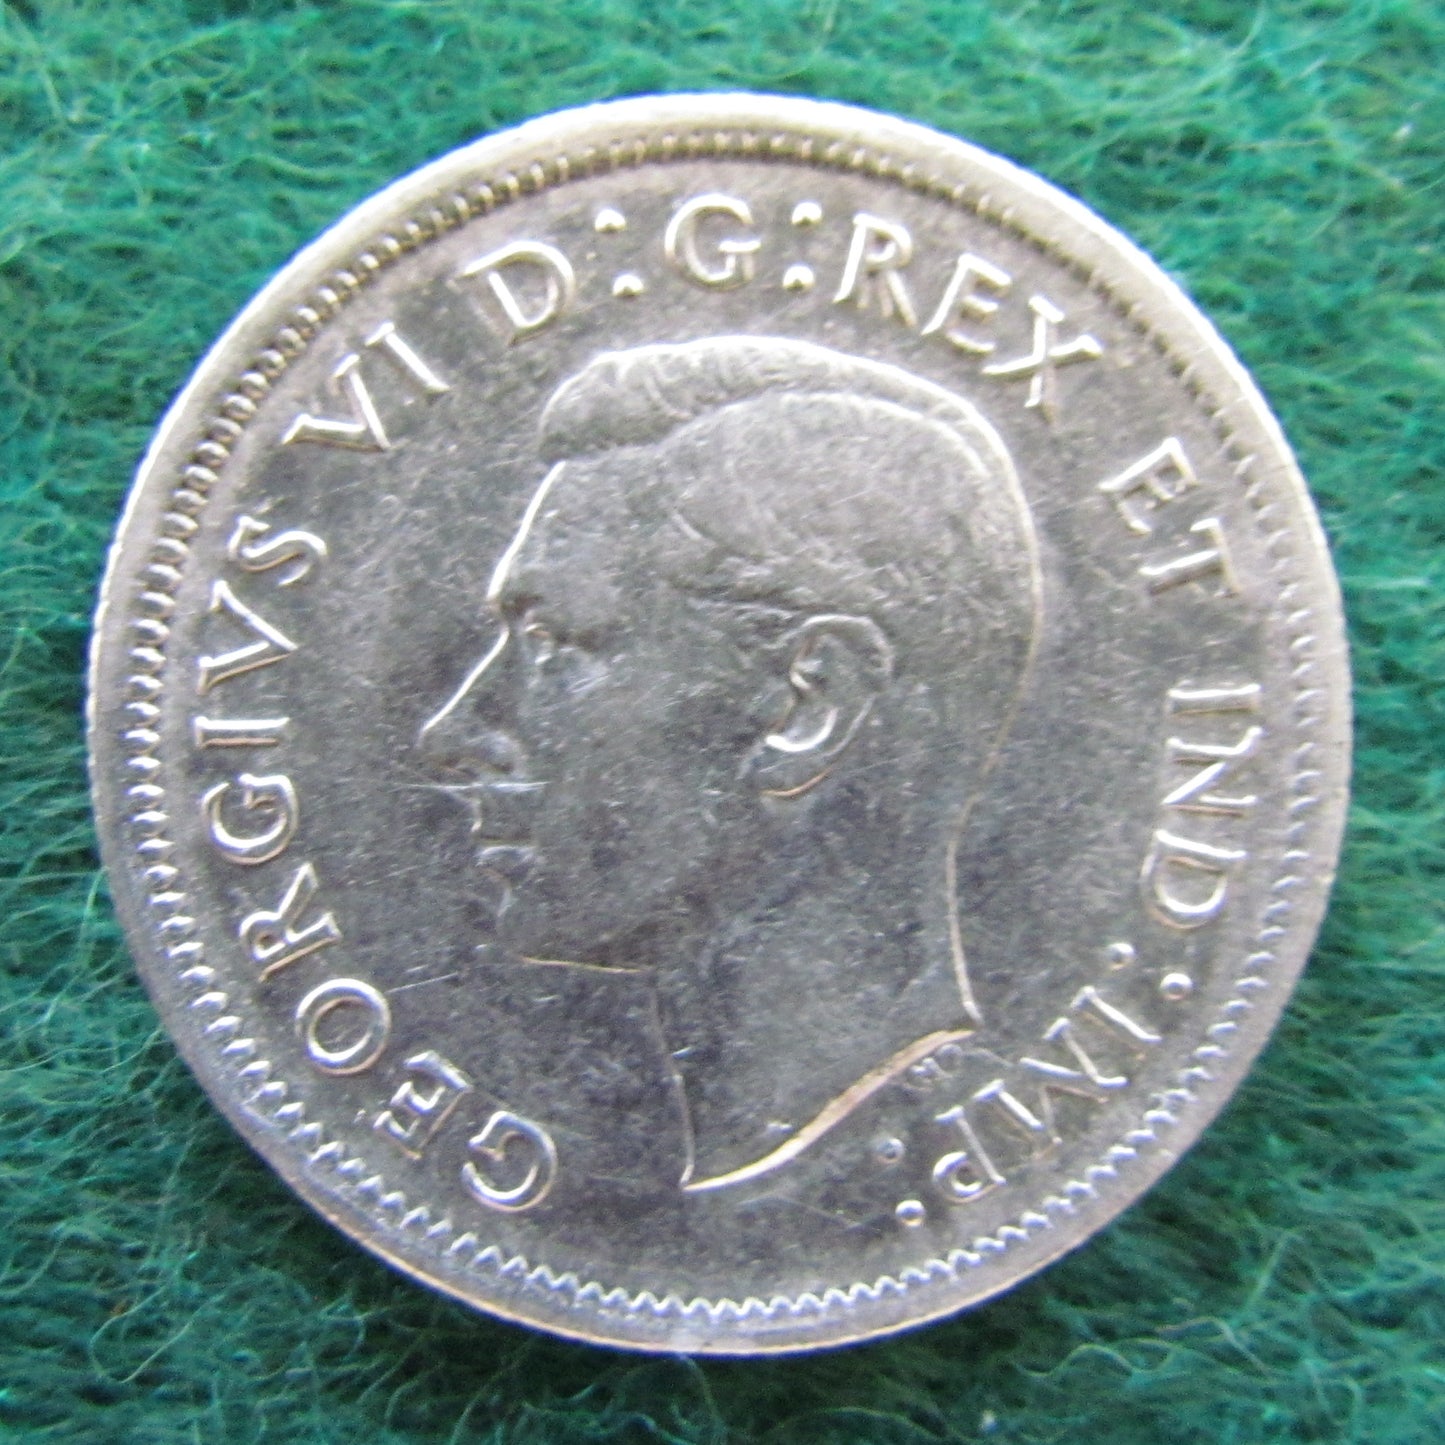 Canada 1939 25 Cent Silver King George VI Coin - Circulated